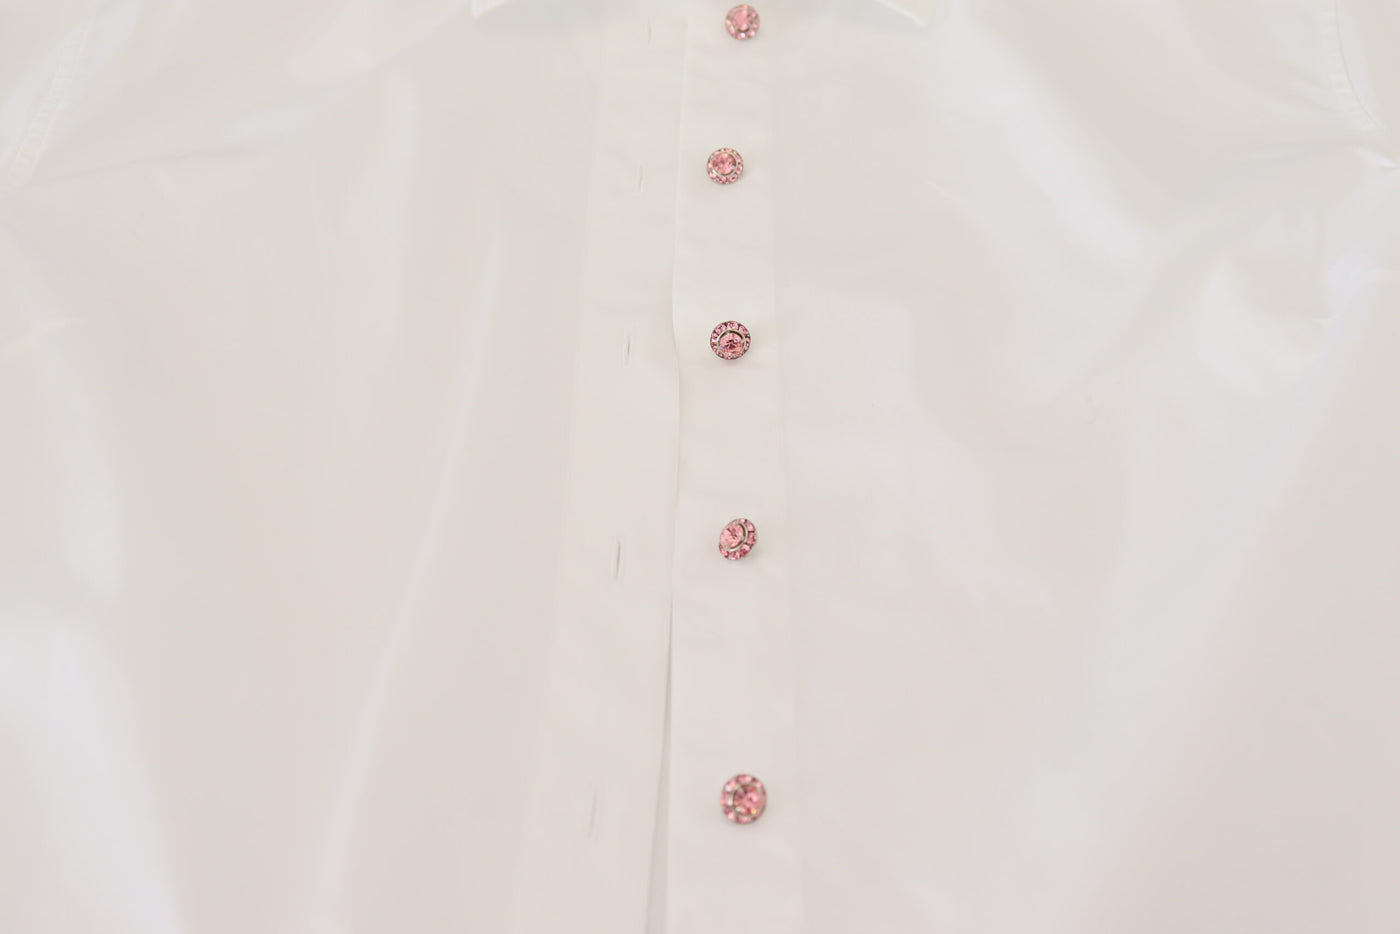 White Cotton Button Front Short Sleeve Top